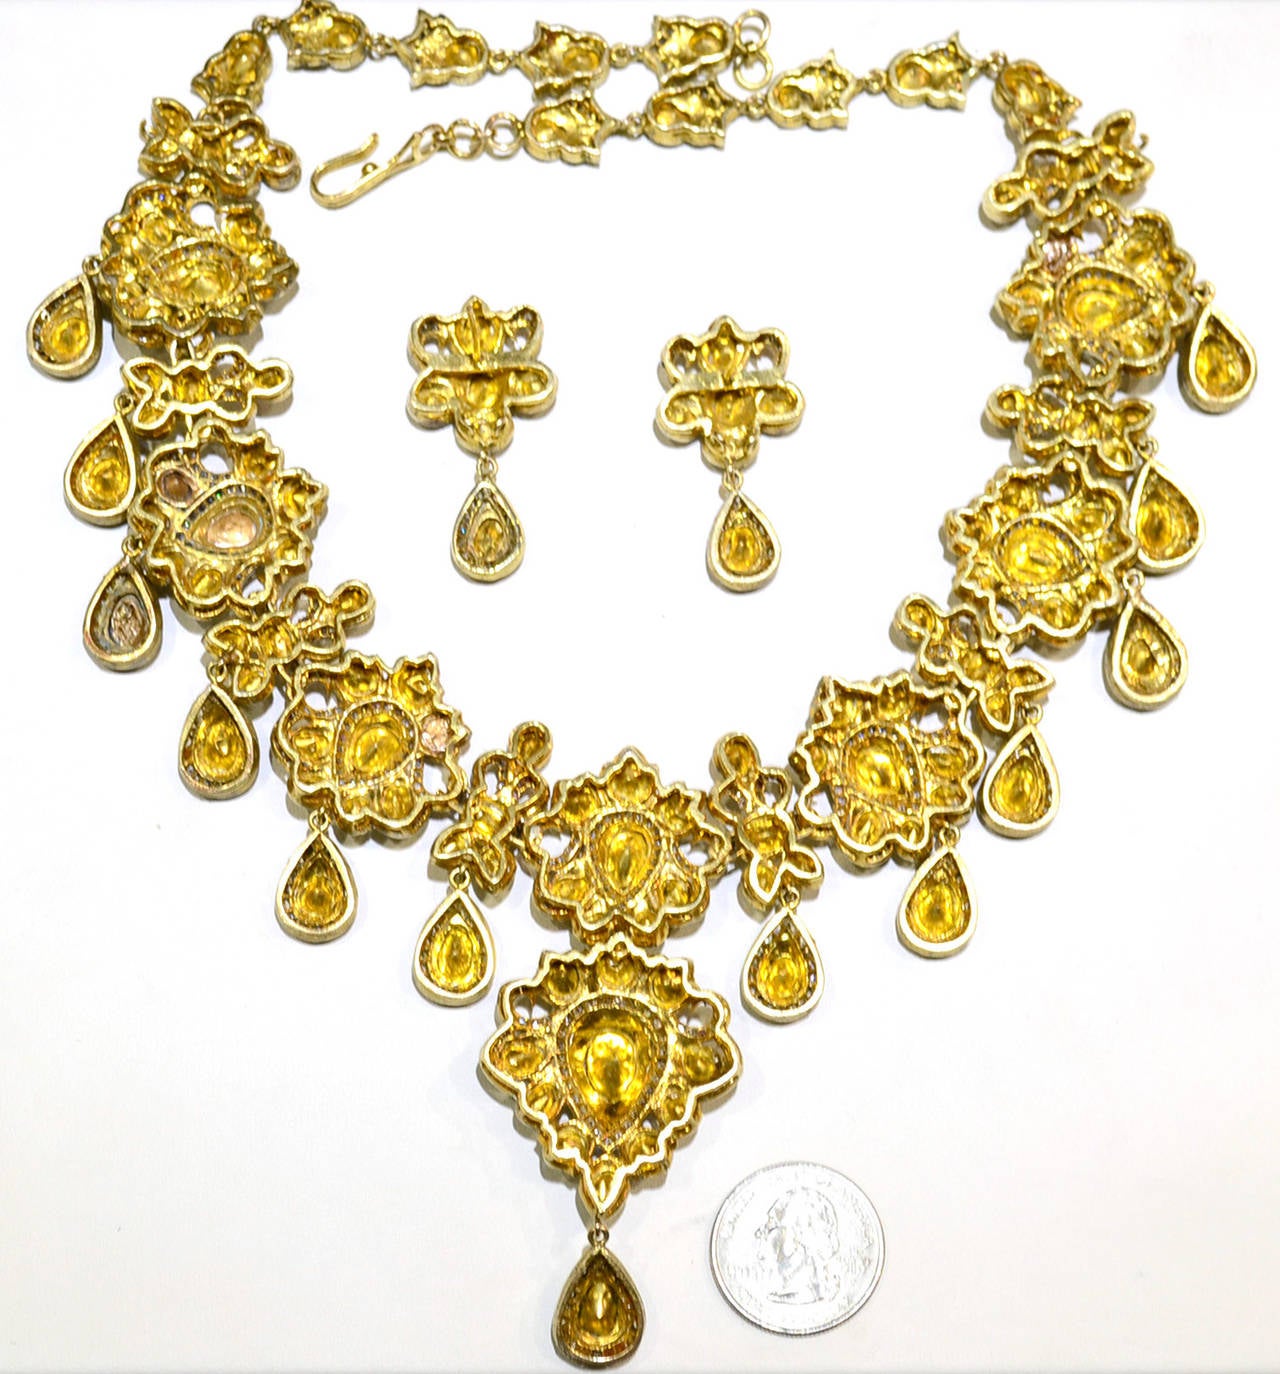 Indian Rajasthani Diamond Necklace and Earrings In Excellent Condition For Sale In Salt Lake City, UT